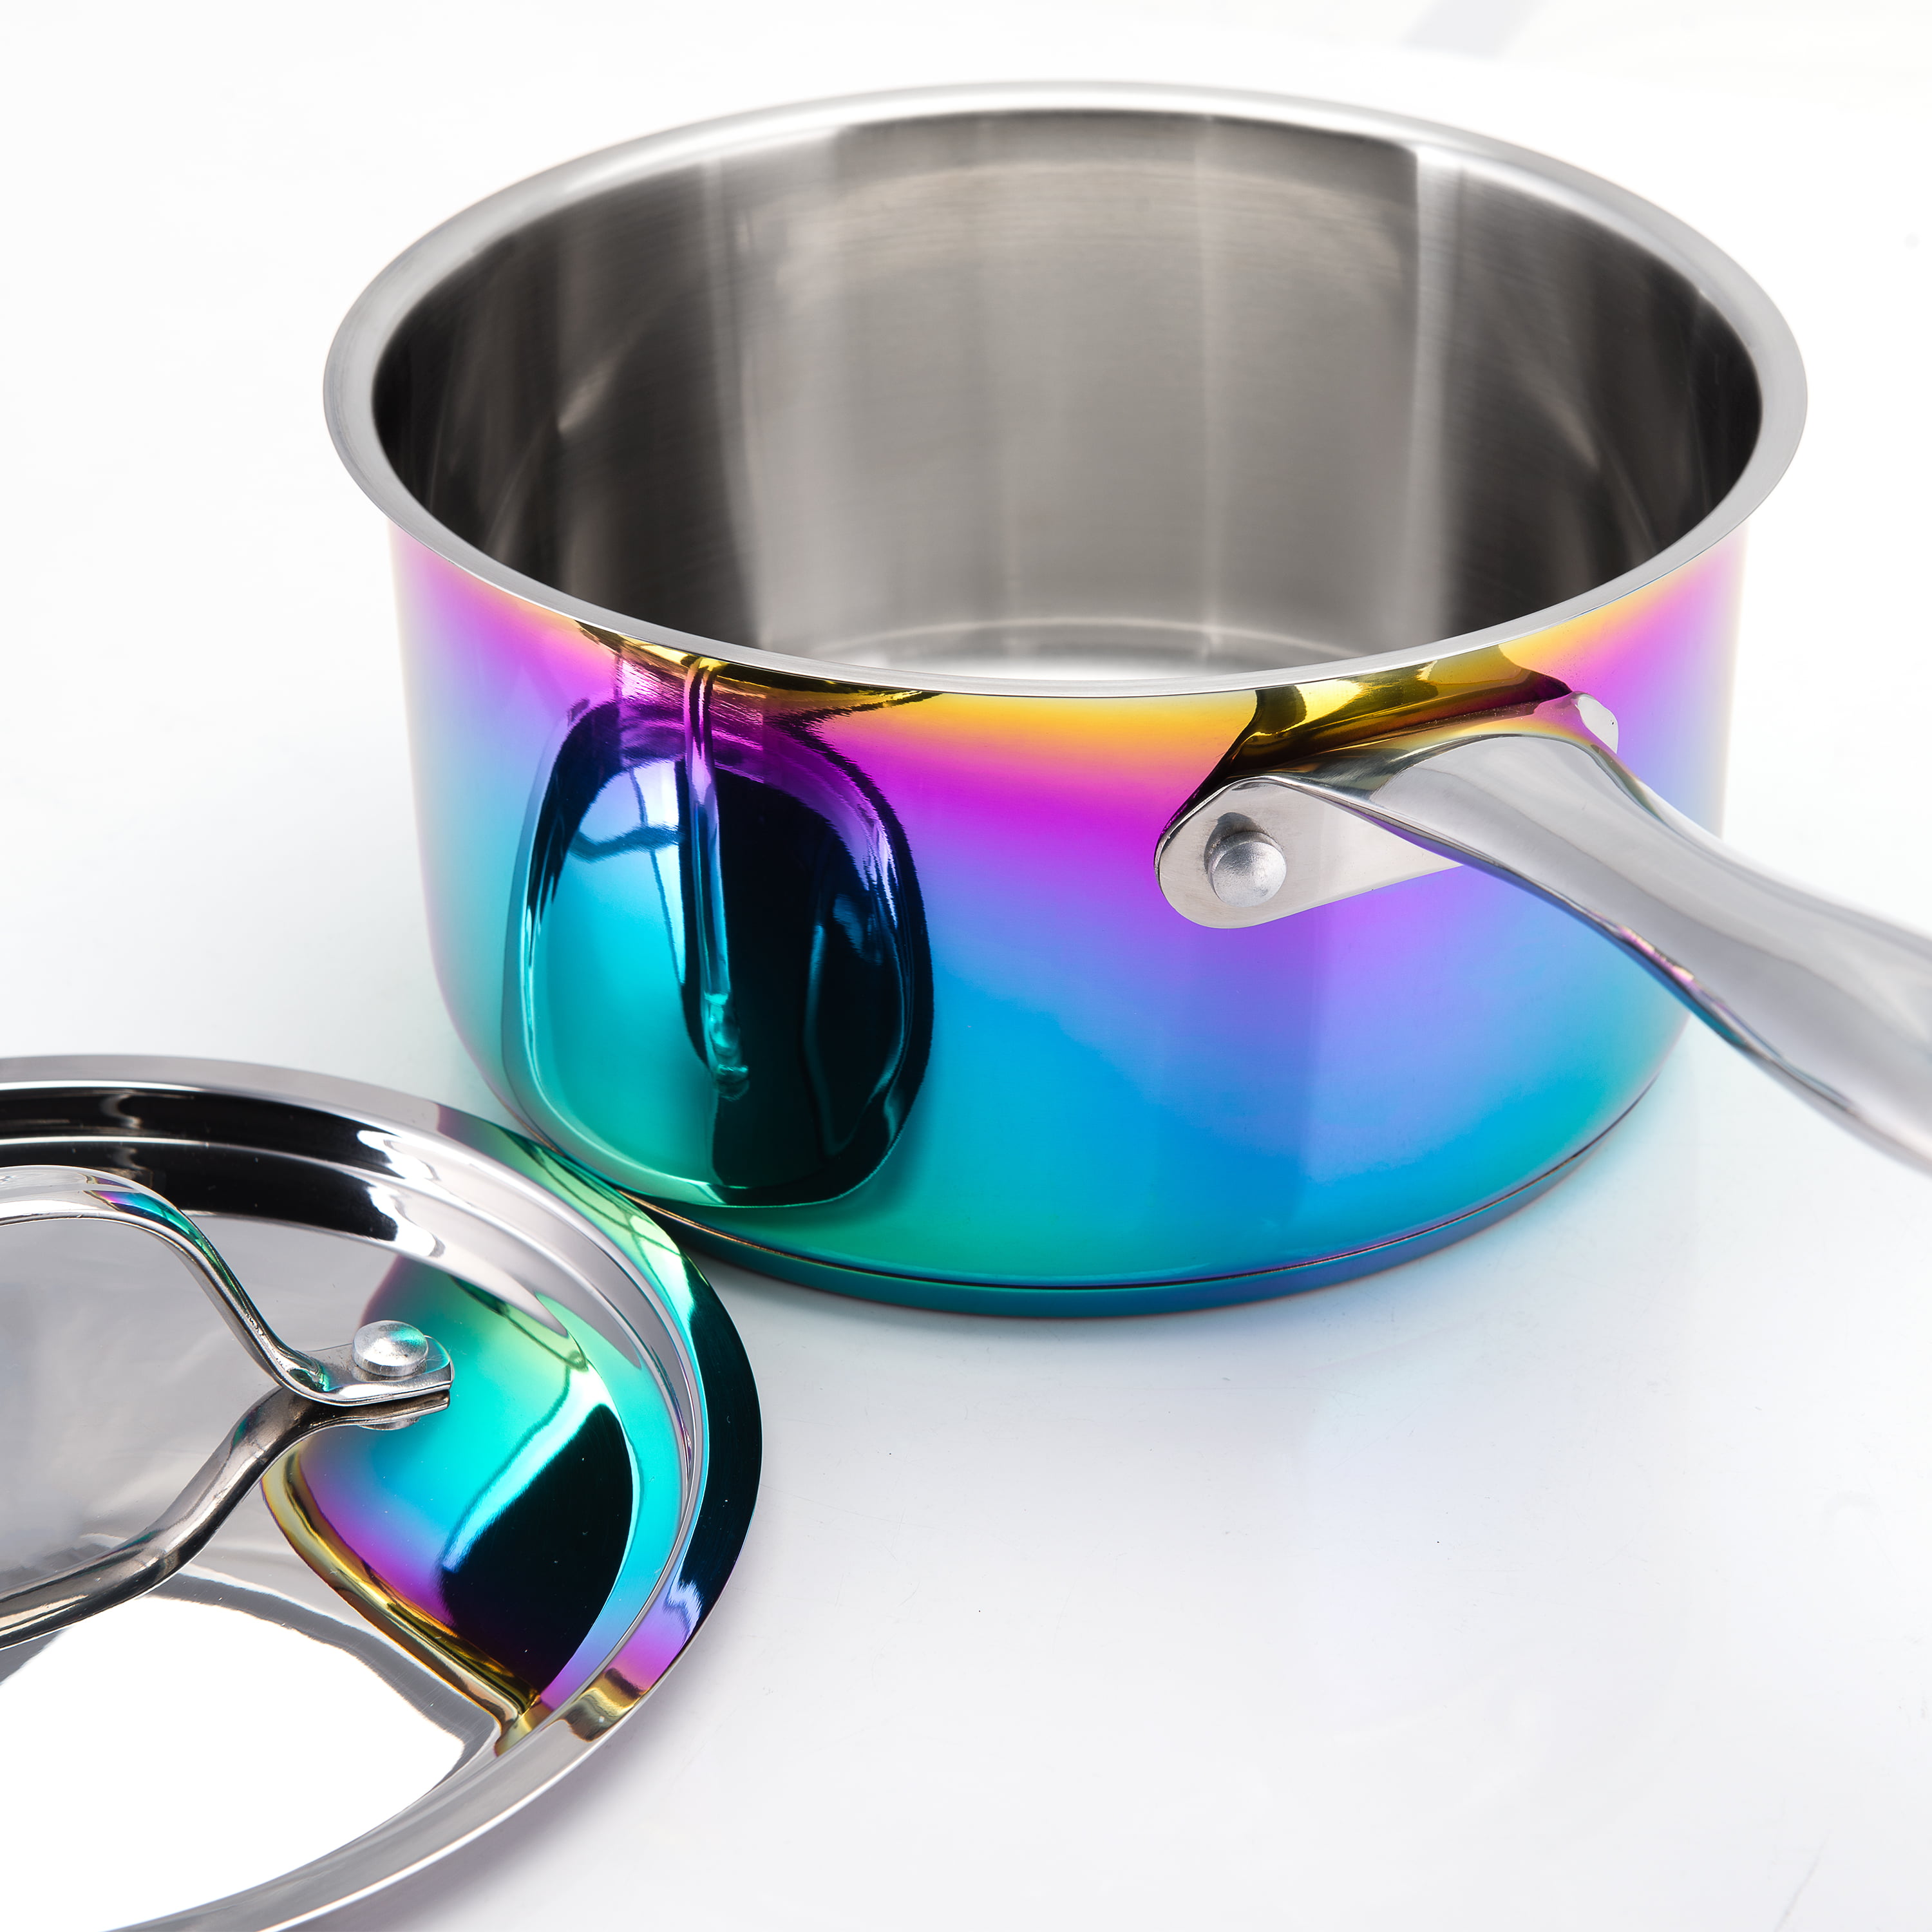 The Magical Kitchen Collection - Iridescent Rainbow Cookware Set - Premium  Heavy Duty Stainless Steel and Titanium Pots & Pans Set - Rust Proof,  Induction Stove & Oven-Safe (10 Piece) - Yahoo Shopping